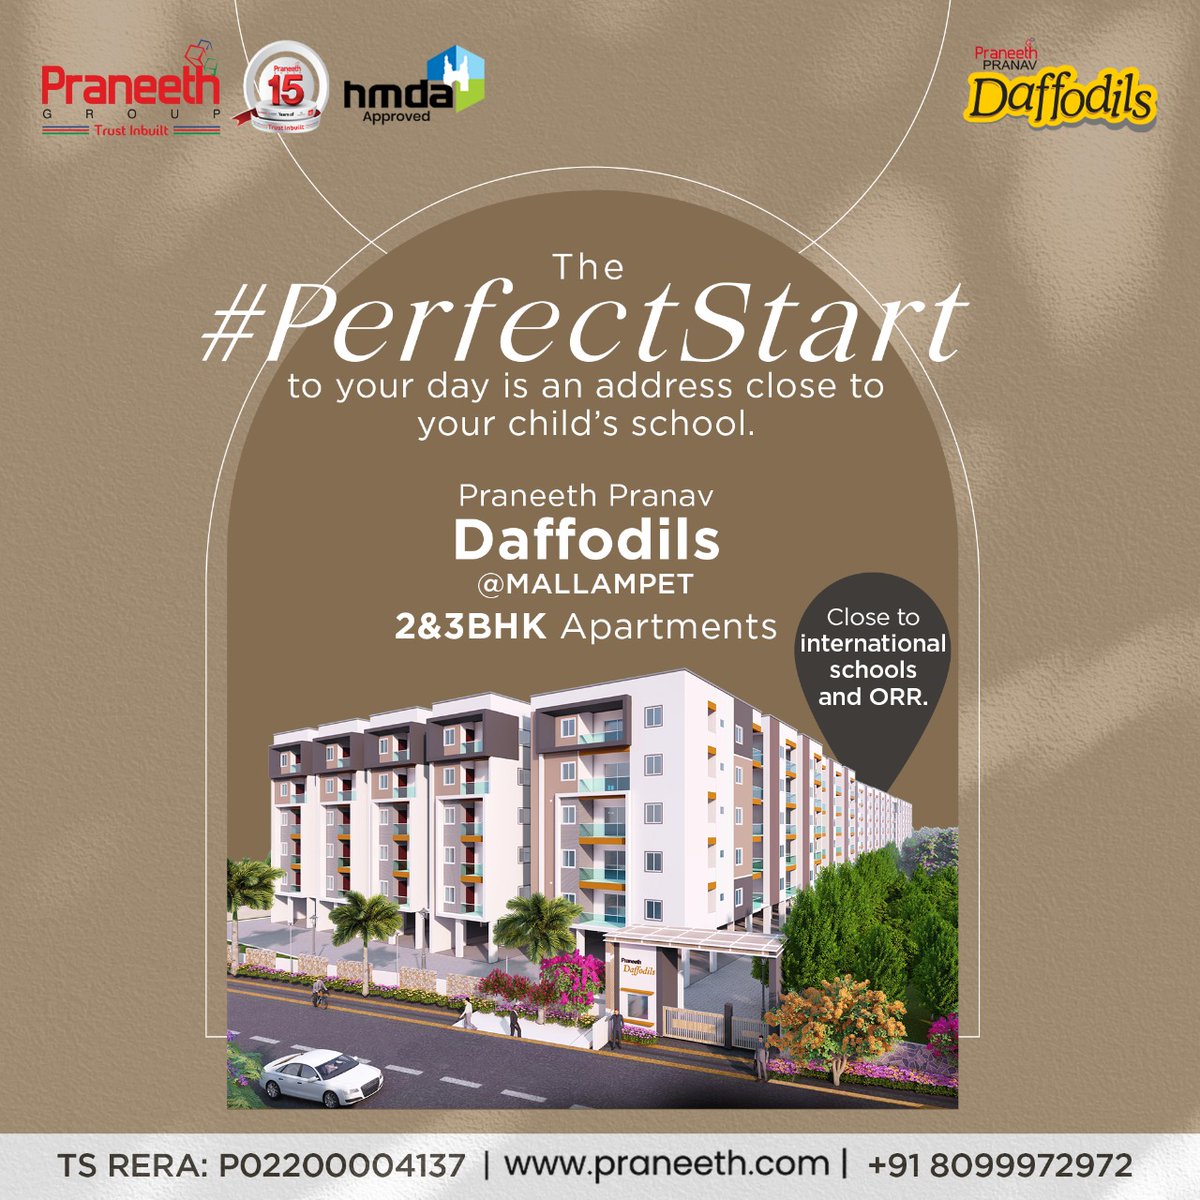 #PraneethPranavDaffodils brings convenience of travel to your life, as it is situated nearby many workplaces and IT hubs!
Invest in a home which cuts your travel time and lets you climb the ladder of success!
#praneethgroup #perfectstart #2and3bhkapartments #hyderabadrealestate